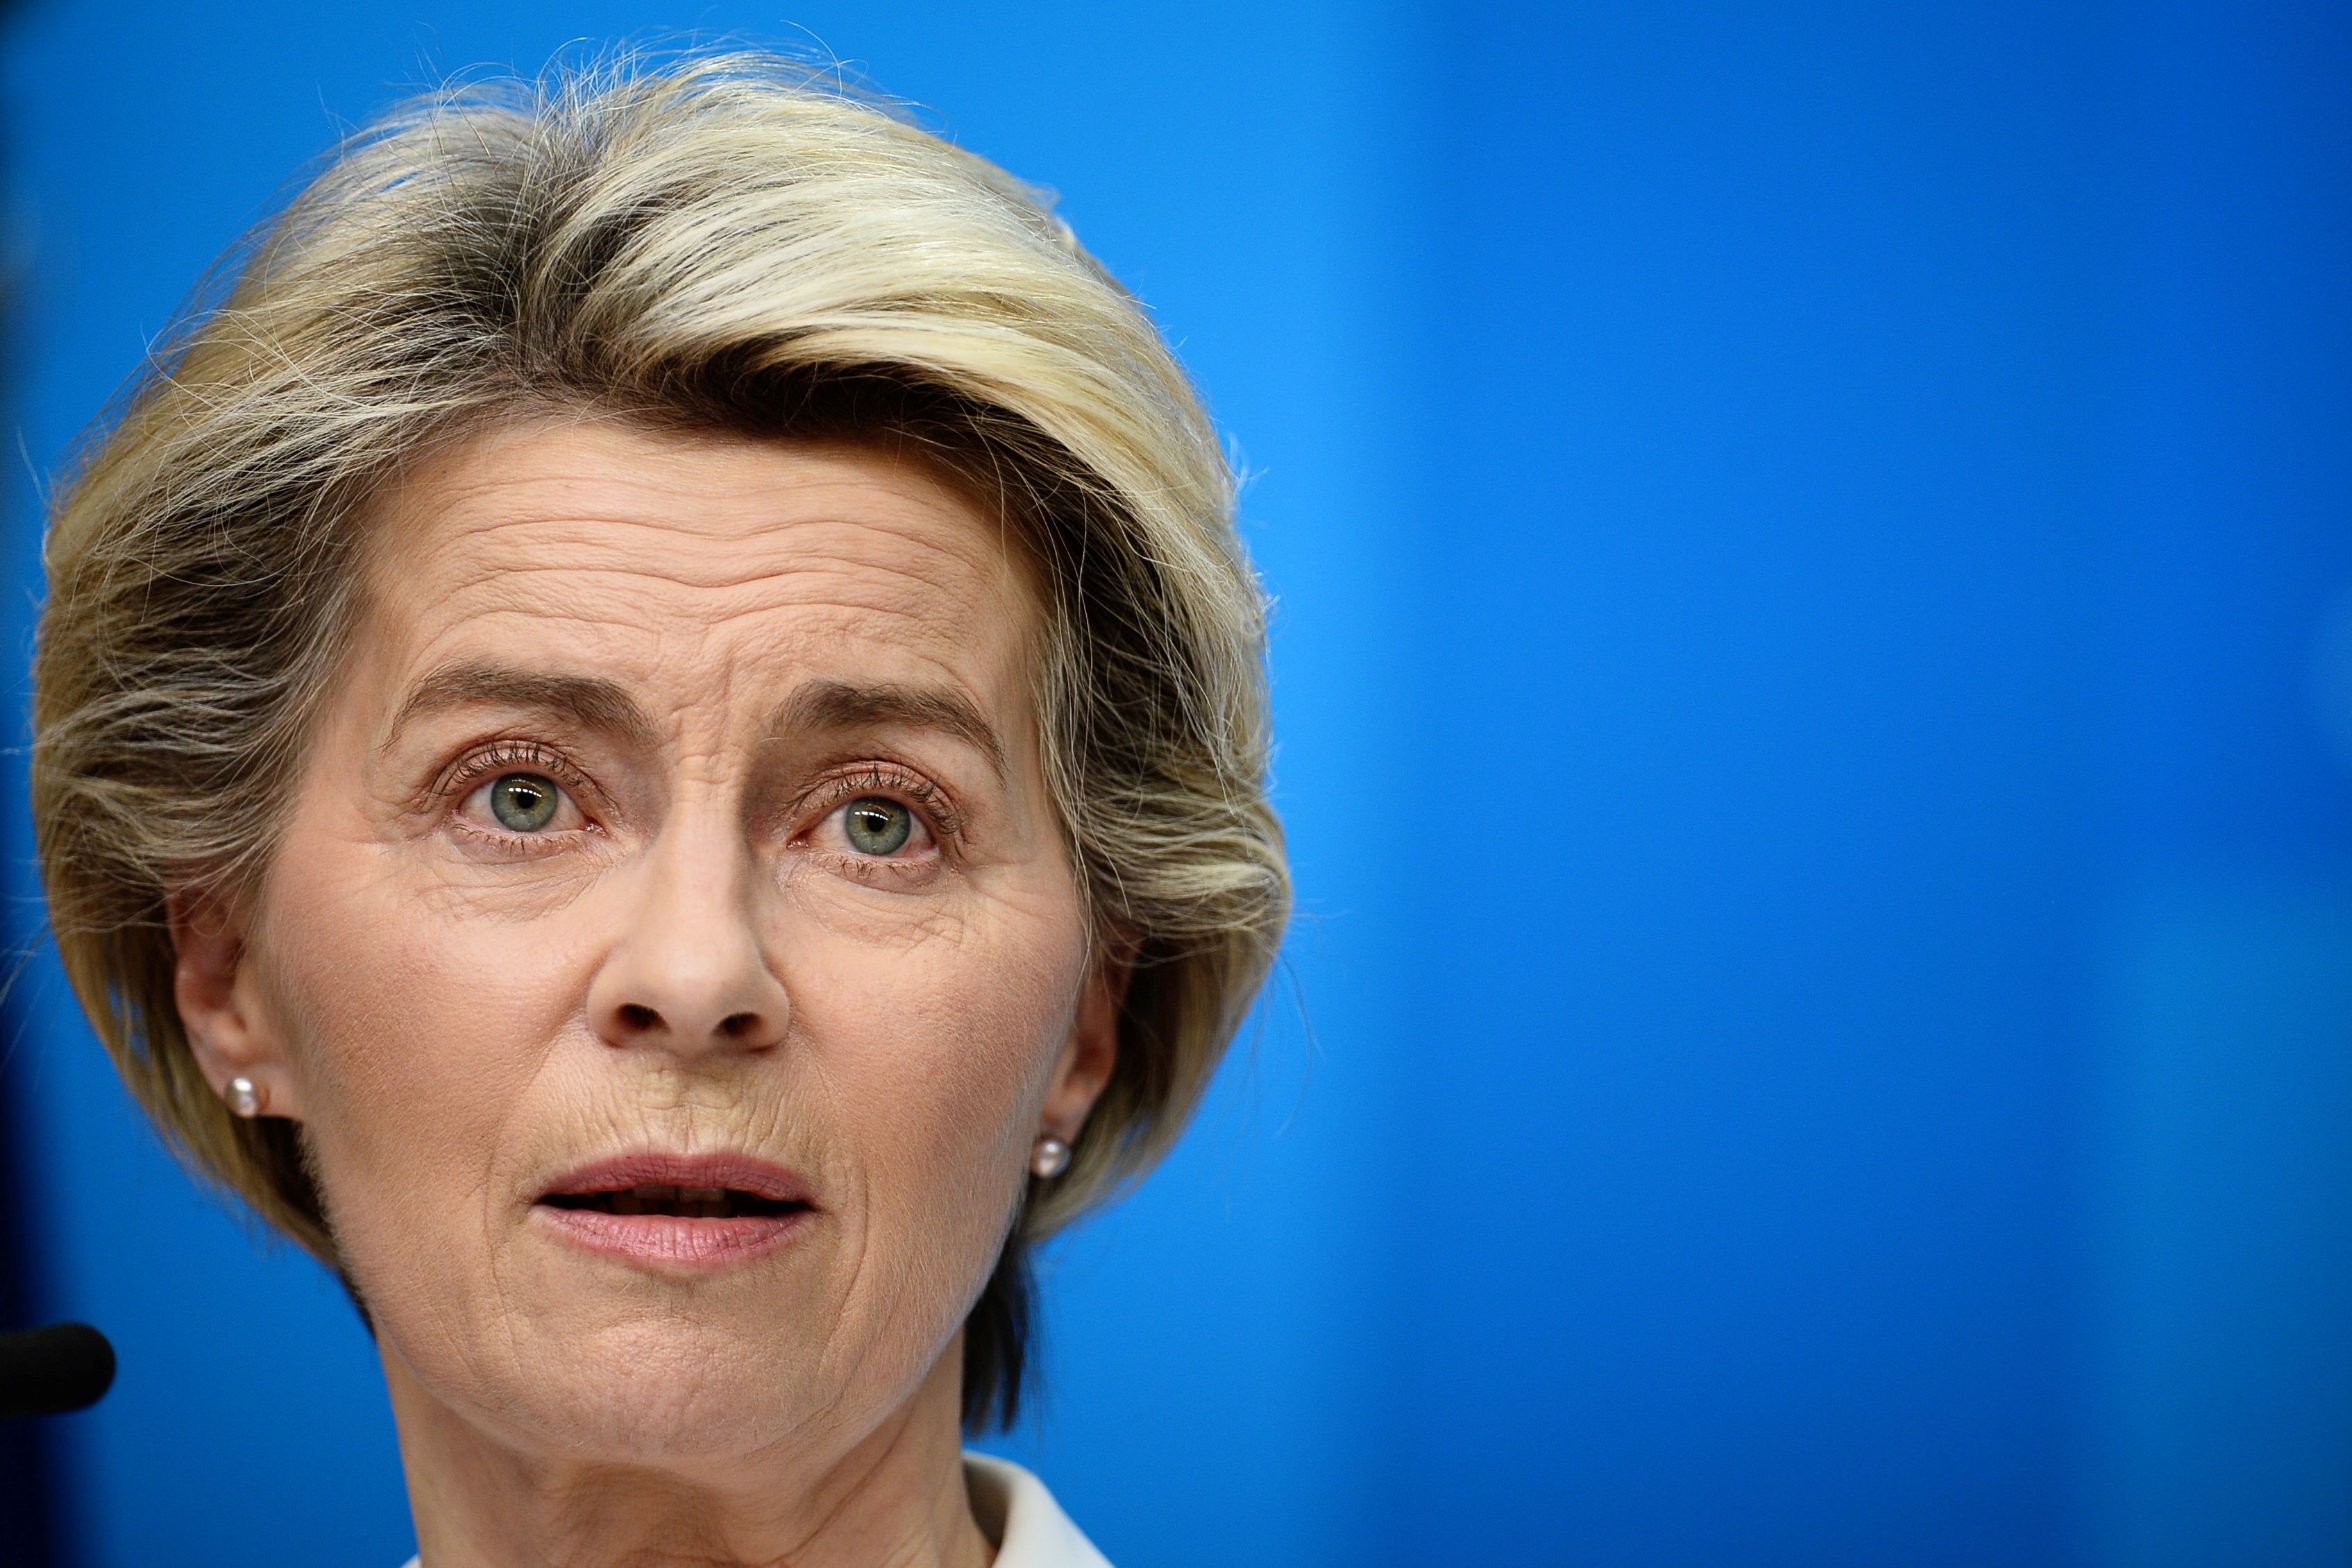 Von der Leyen has fond memories of her time spent in the UK in the late 1970s: ‘For me, London was the epitome of modernity: freedom, the joy of life, trying everything. This gave me an inner freedom that I have kept until today’